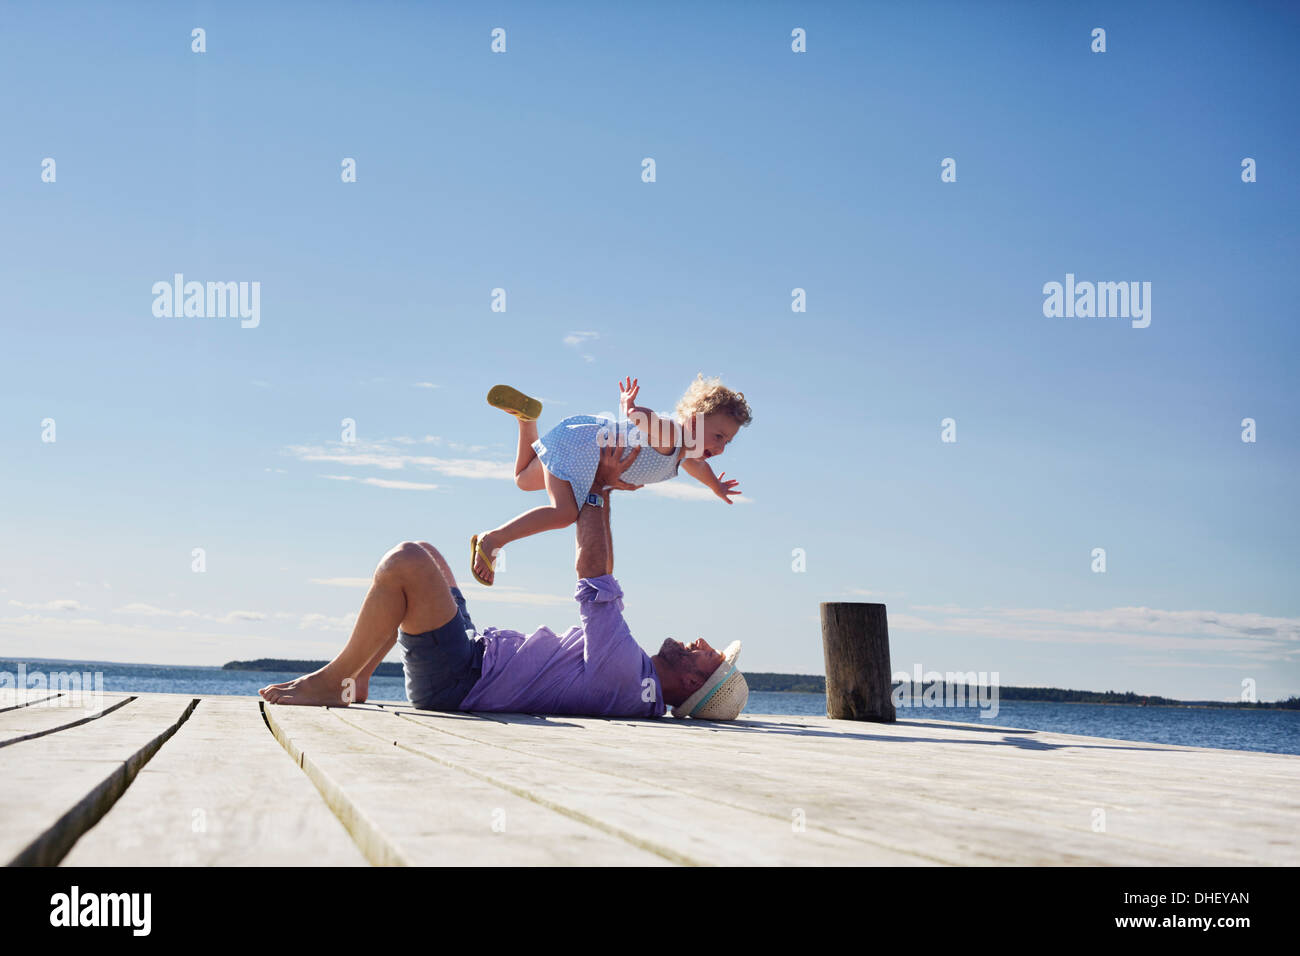 Female toddler and father playing, Utvalnas, Gavle, Sweden Stock Photo